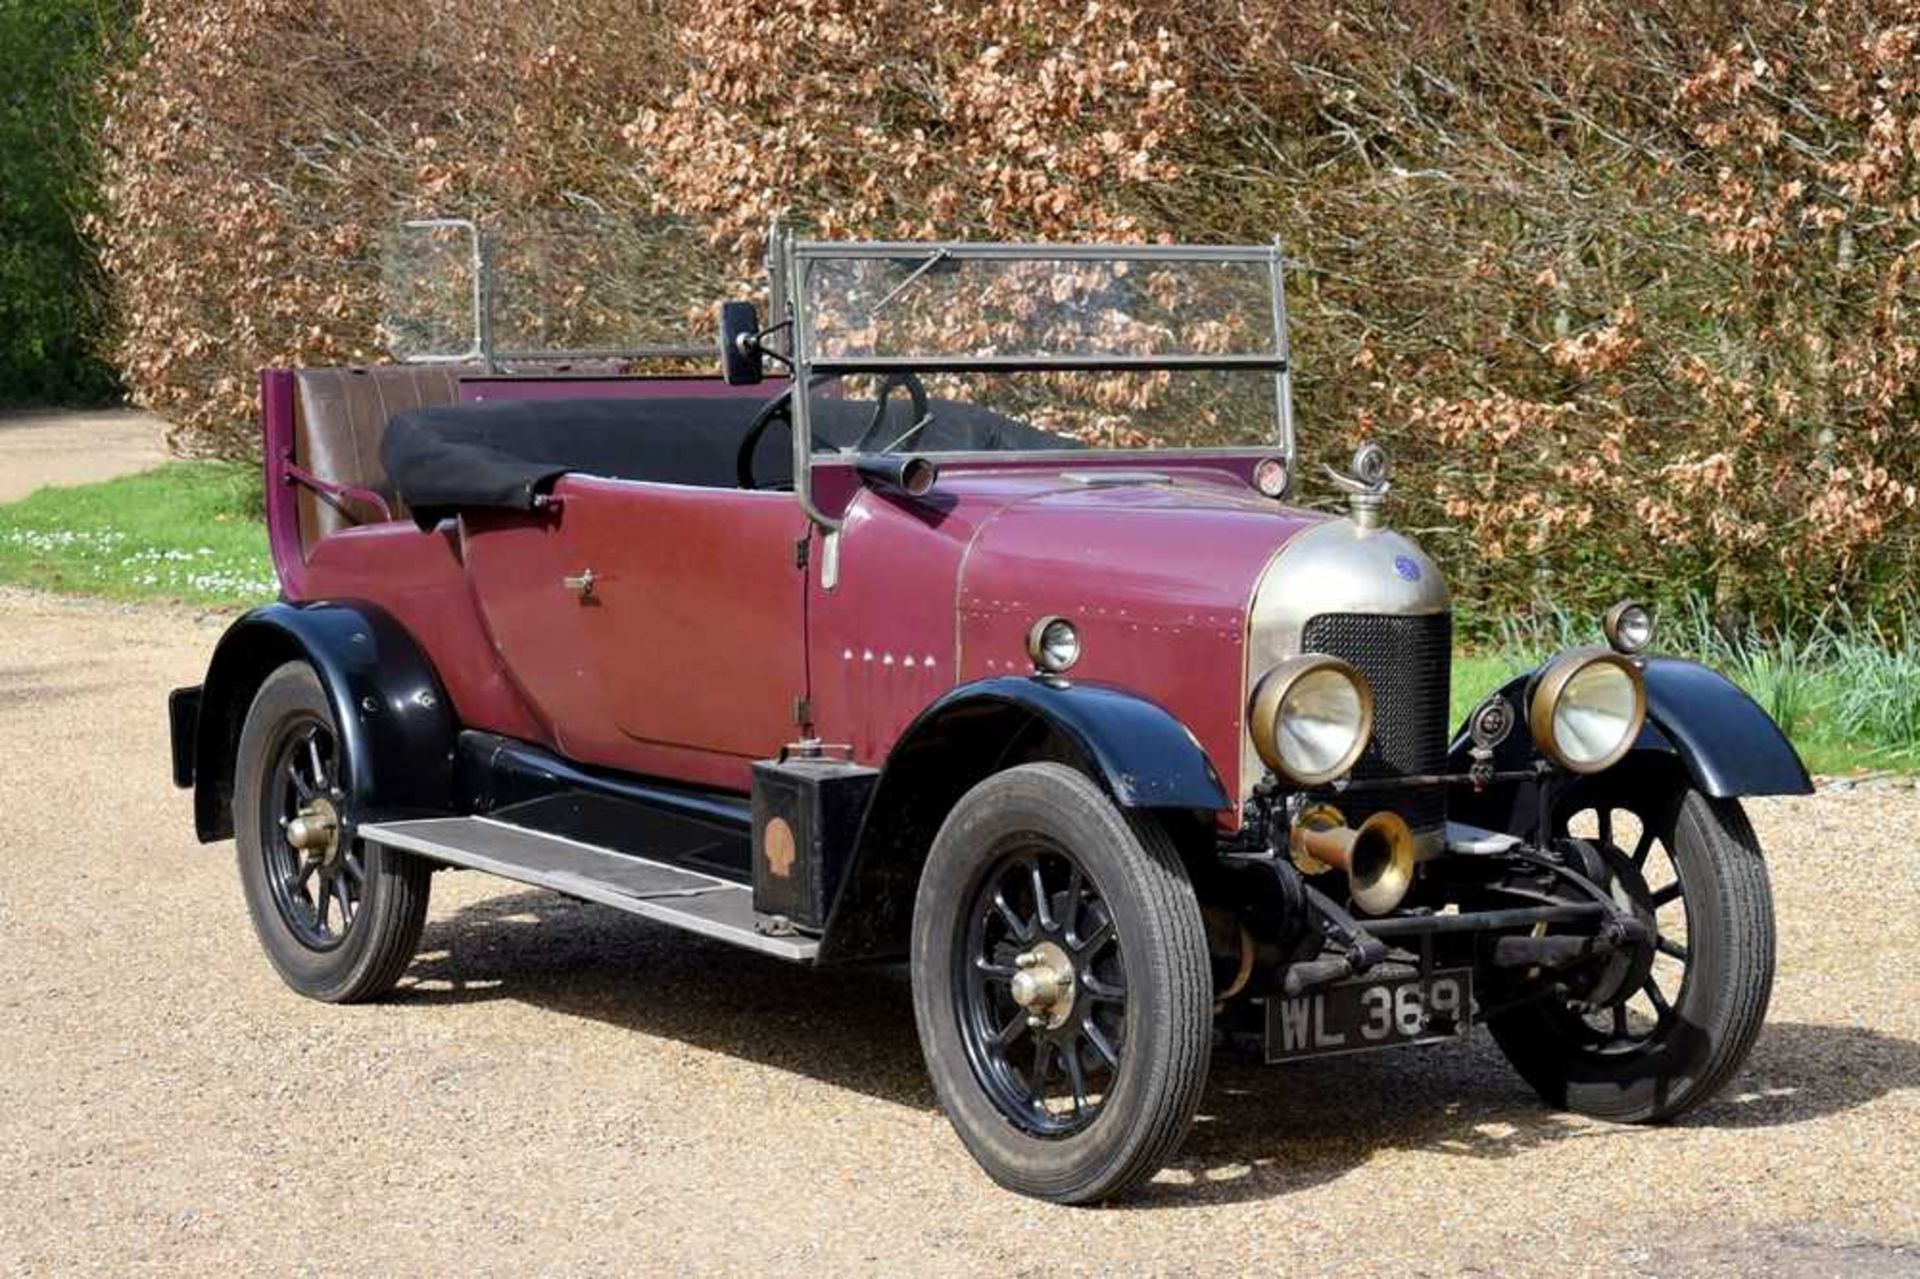 1926 Morris Oxford 'Bullnose' 2-Seat Tourer with Dickey - Image 11 of 99